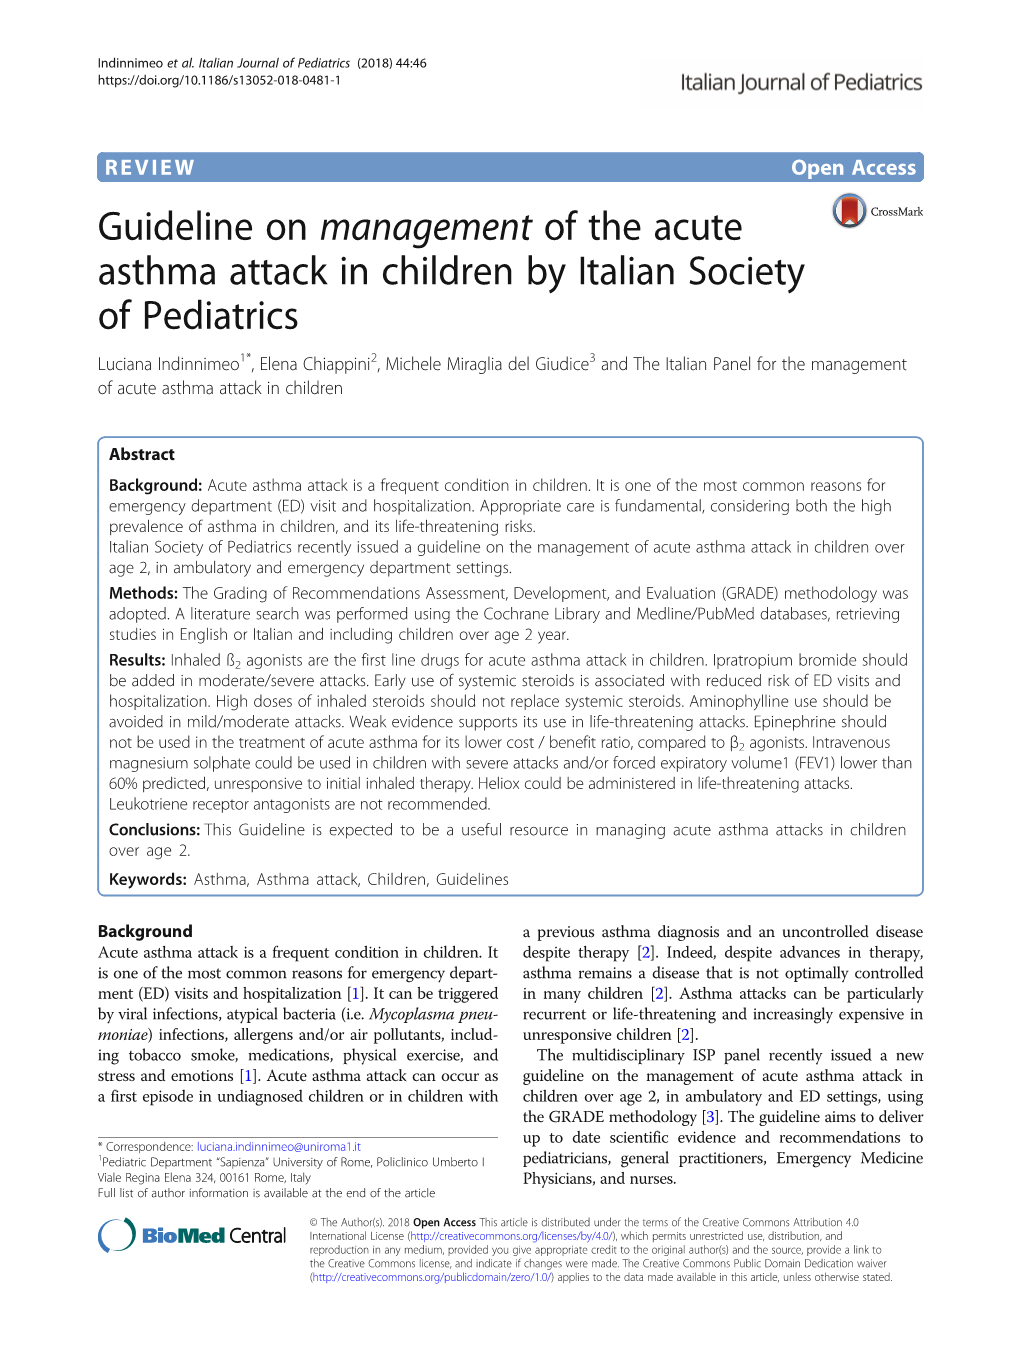 Guideline on Management of the Acute Asthma Attack in Children by Italian Society of Pediatrics